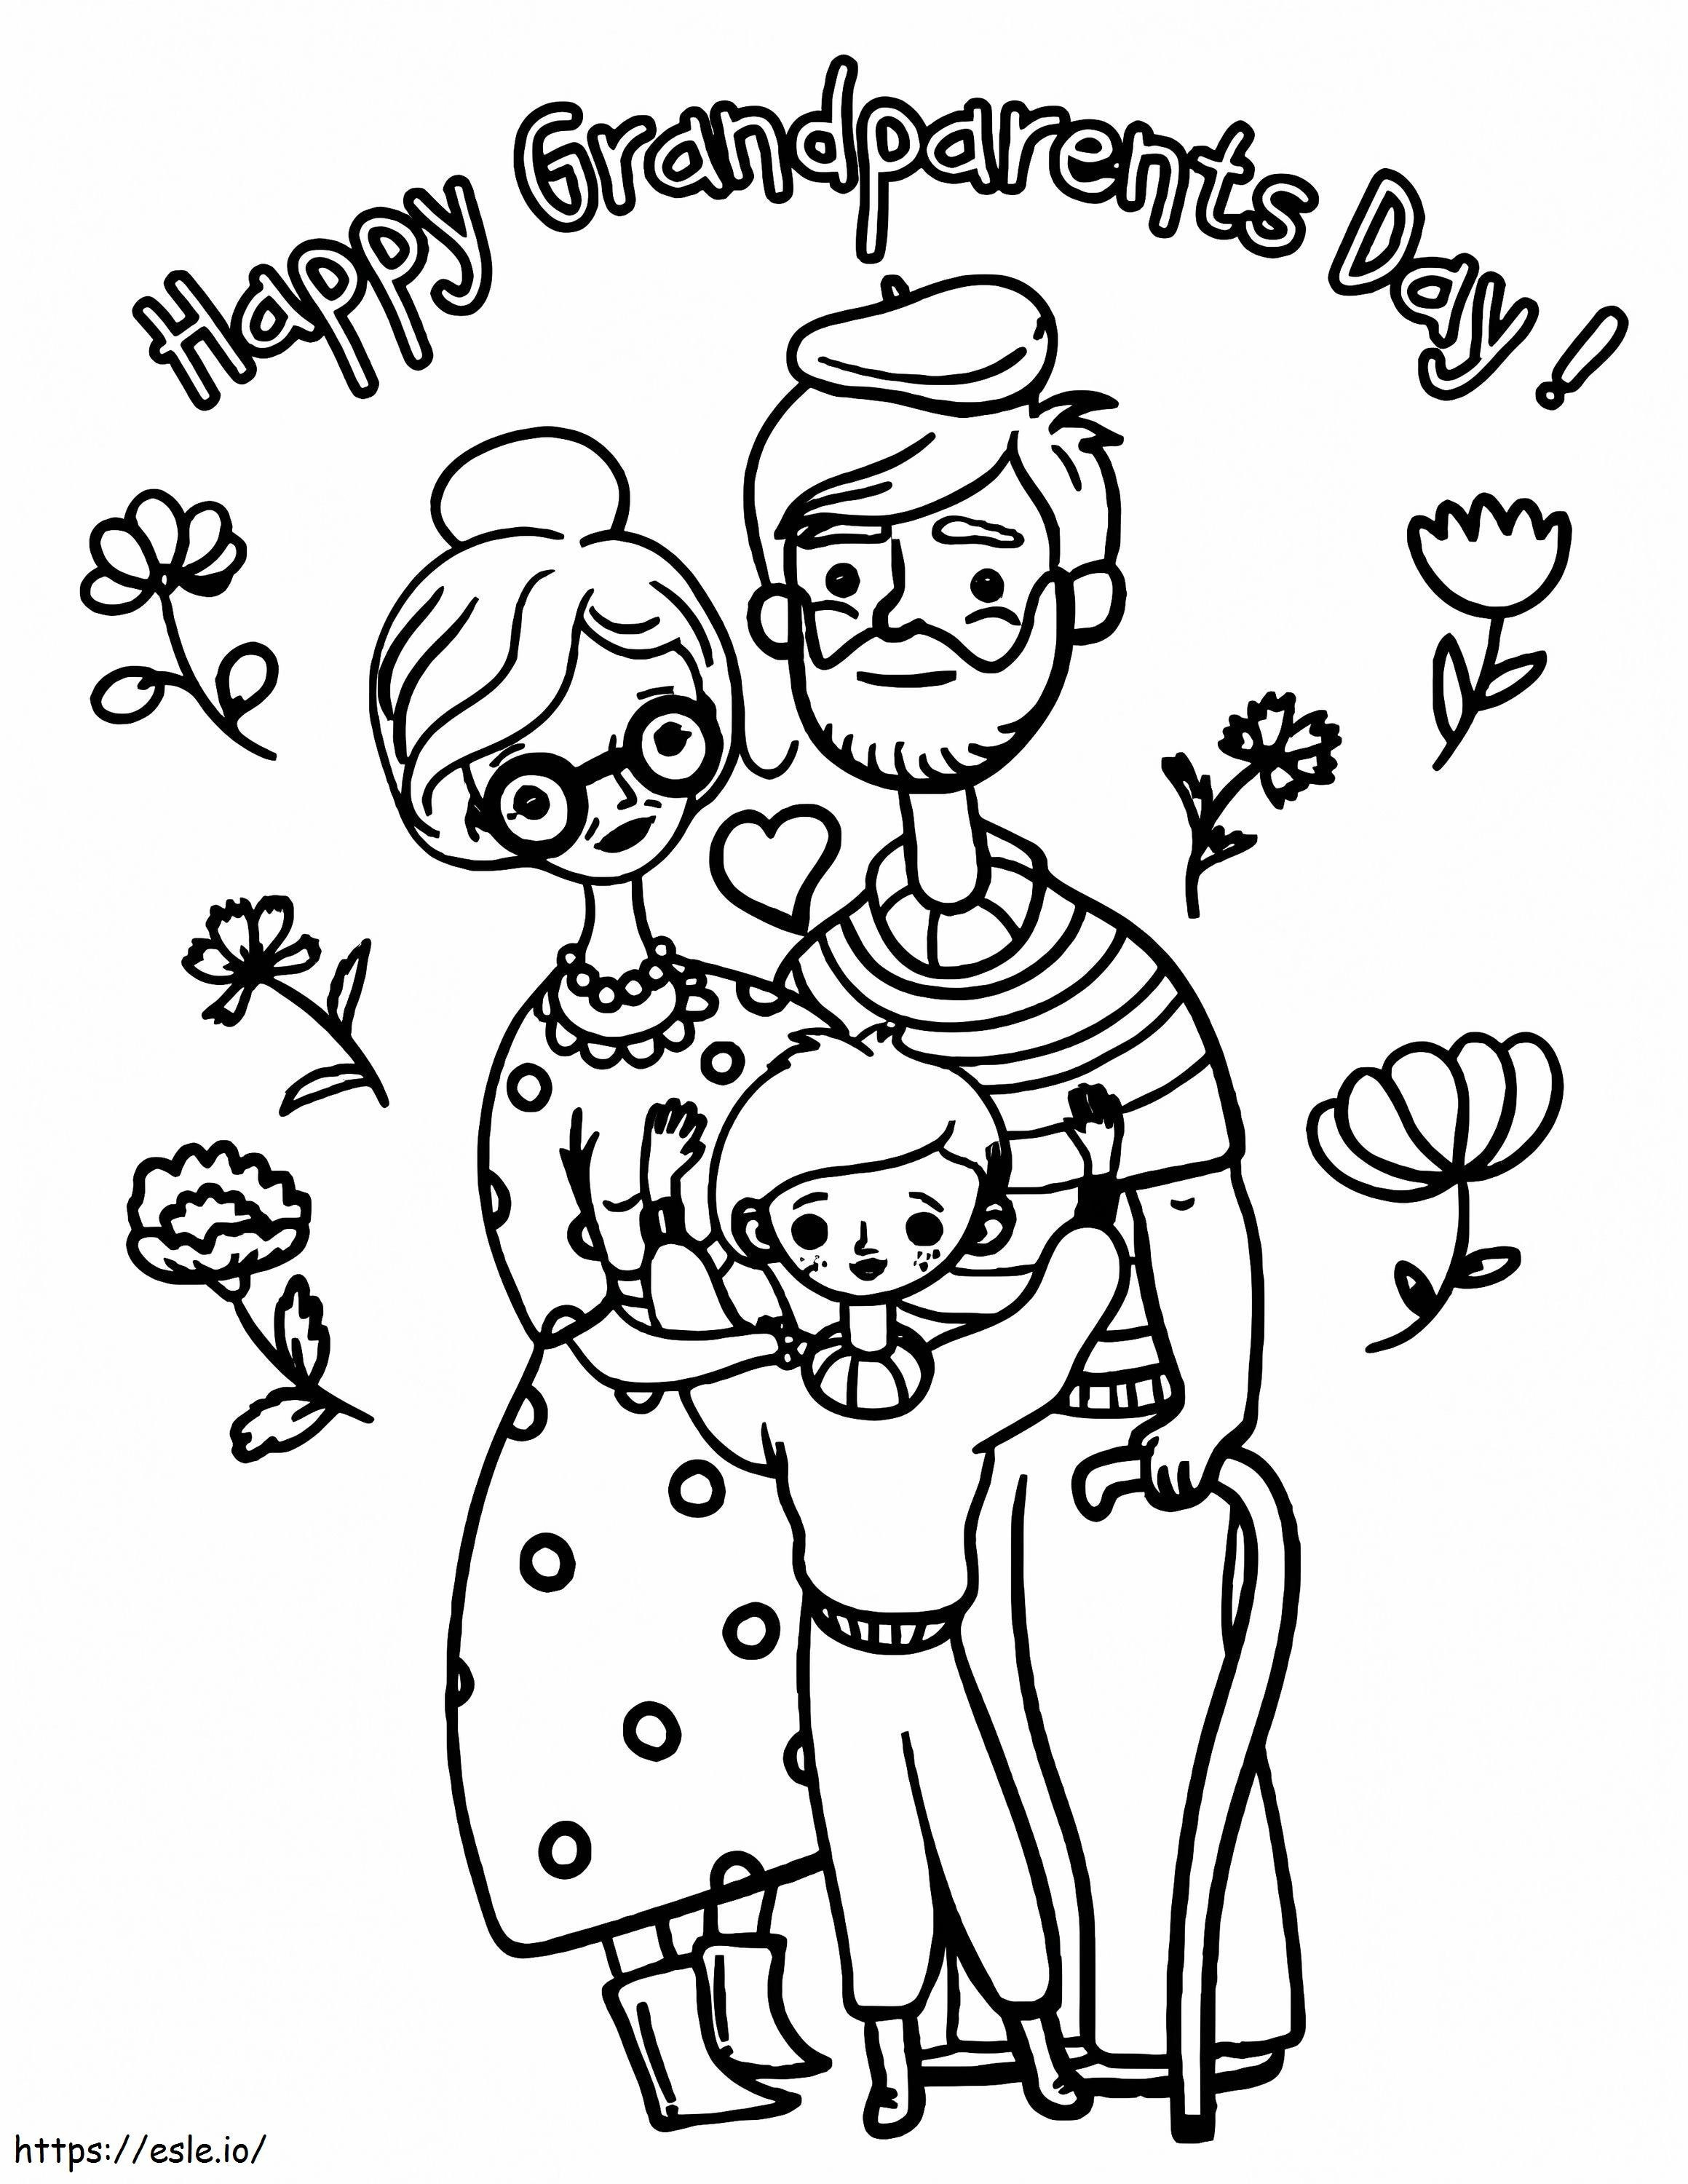 Grandparents Day 2 coloring page